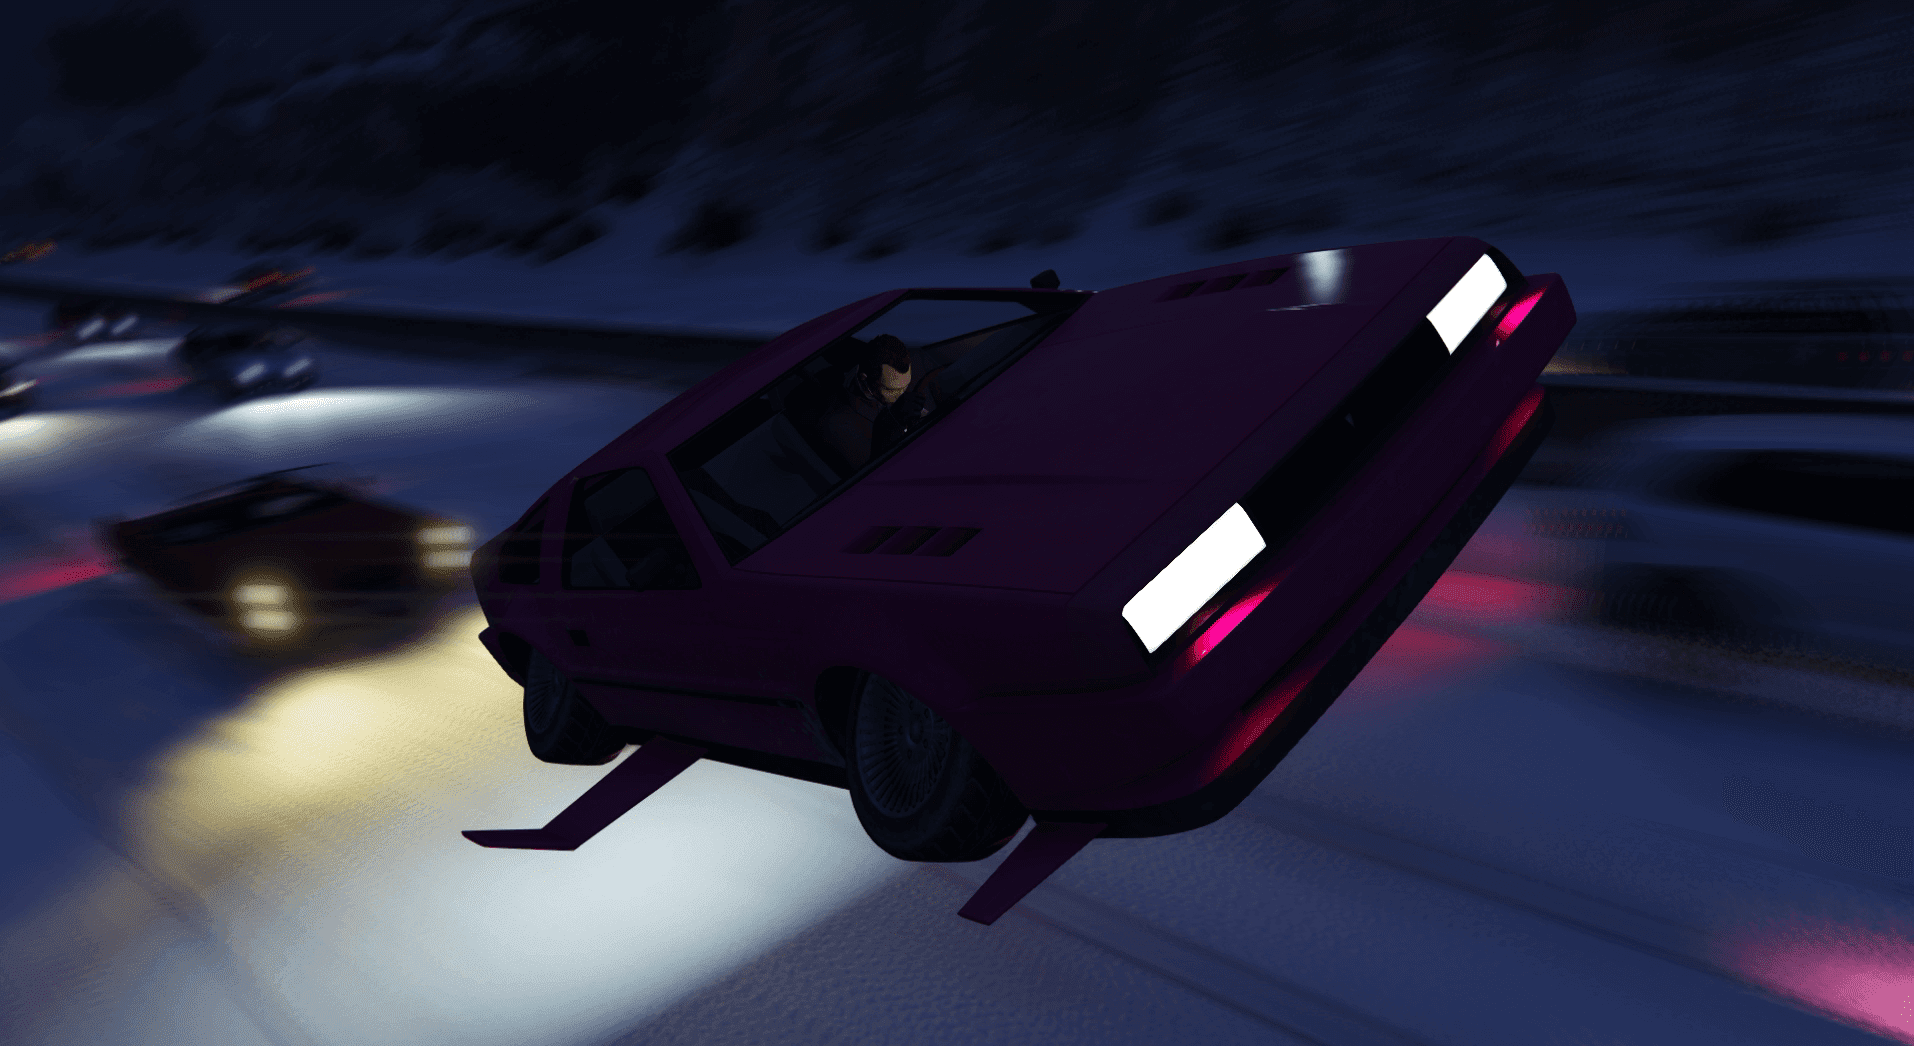 (HD) Plowing away some ice and sleet with the SPD Custom Special Pink Diamond Imponte Deluxo 3